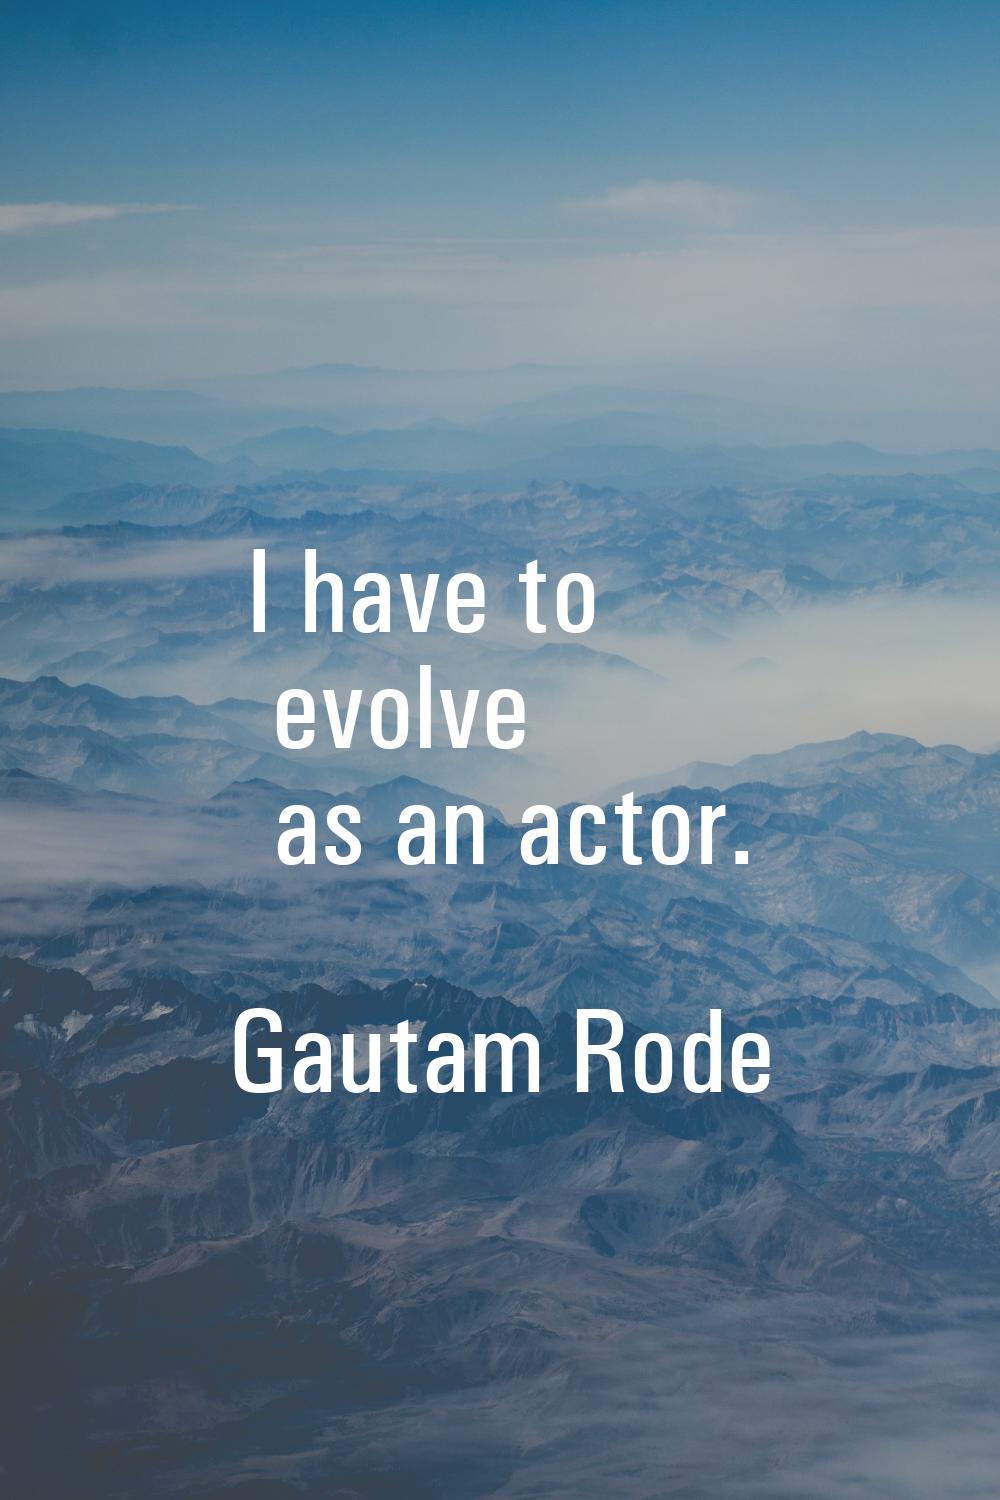 I have to evolve as an actor.